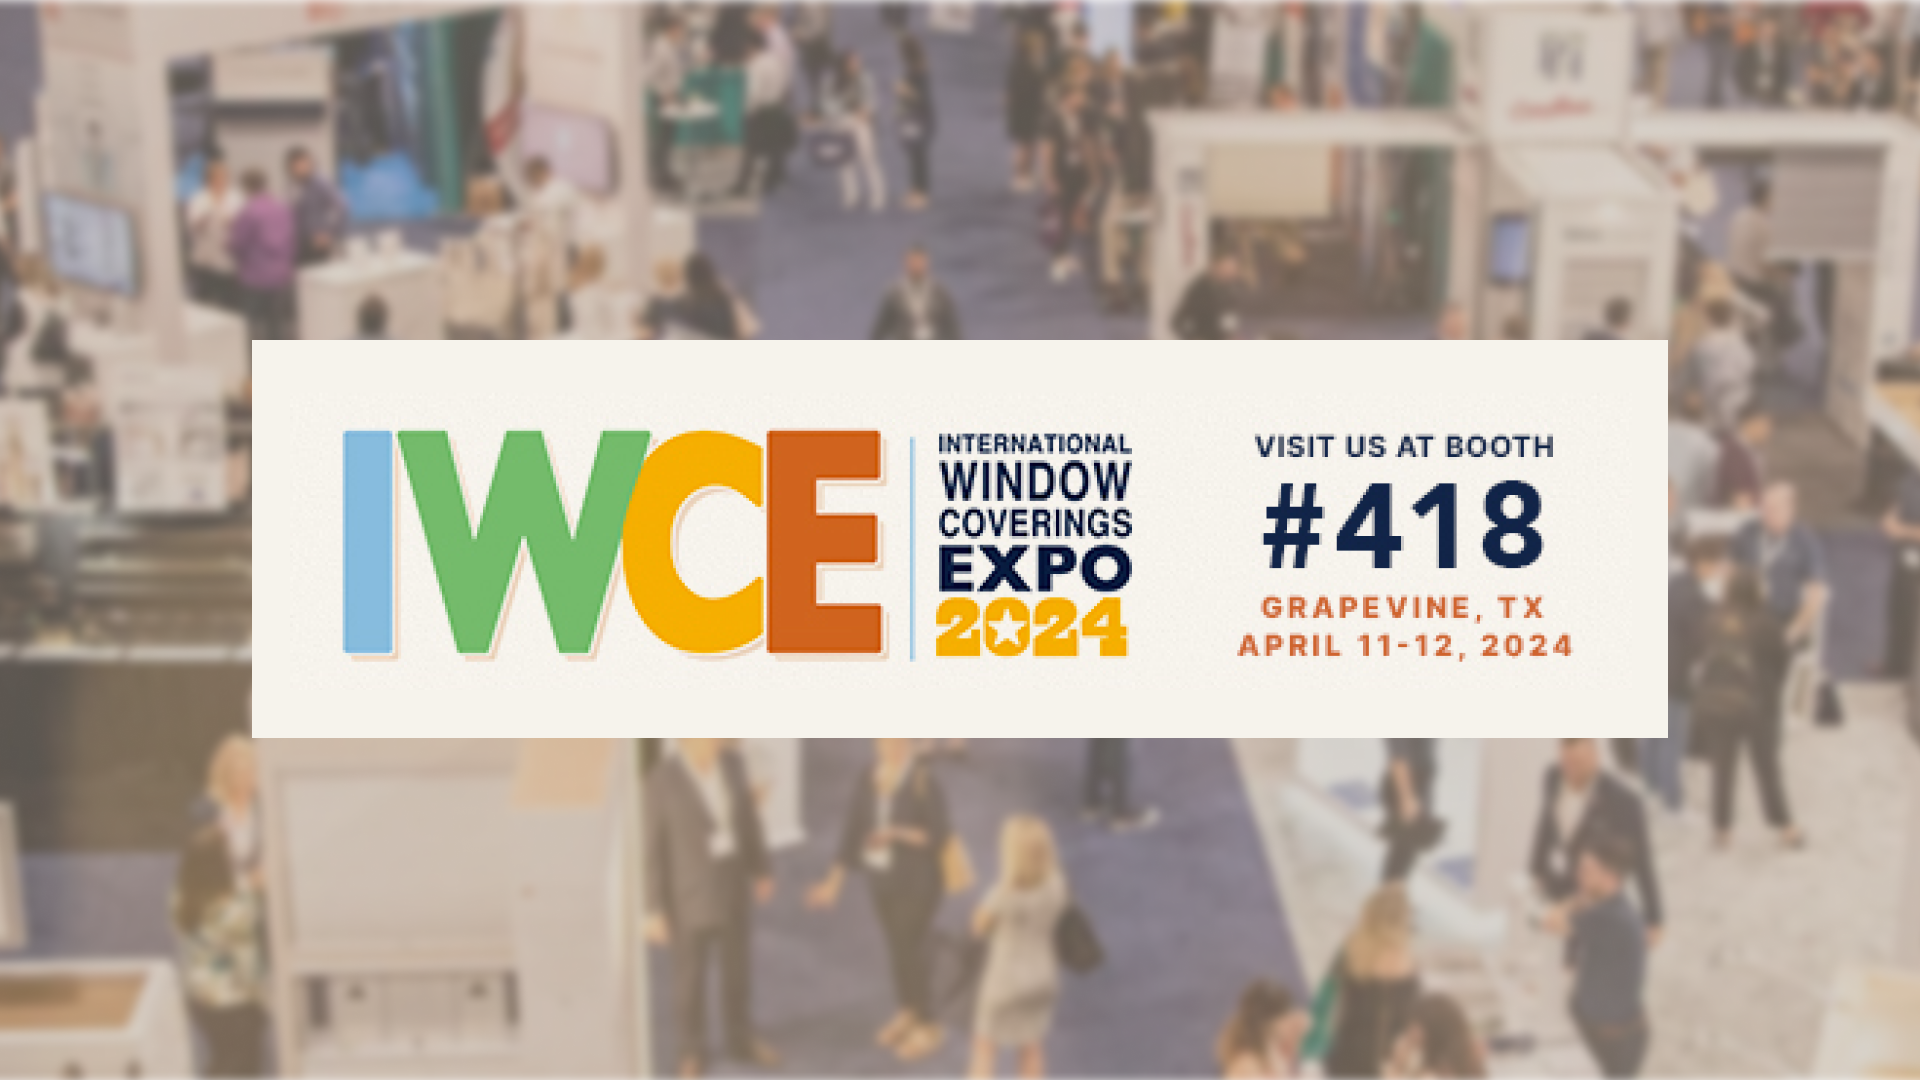 Bond will be at IWCE 2024